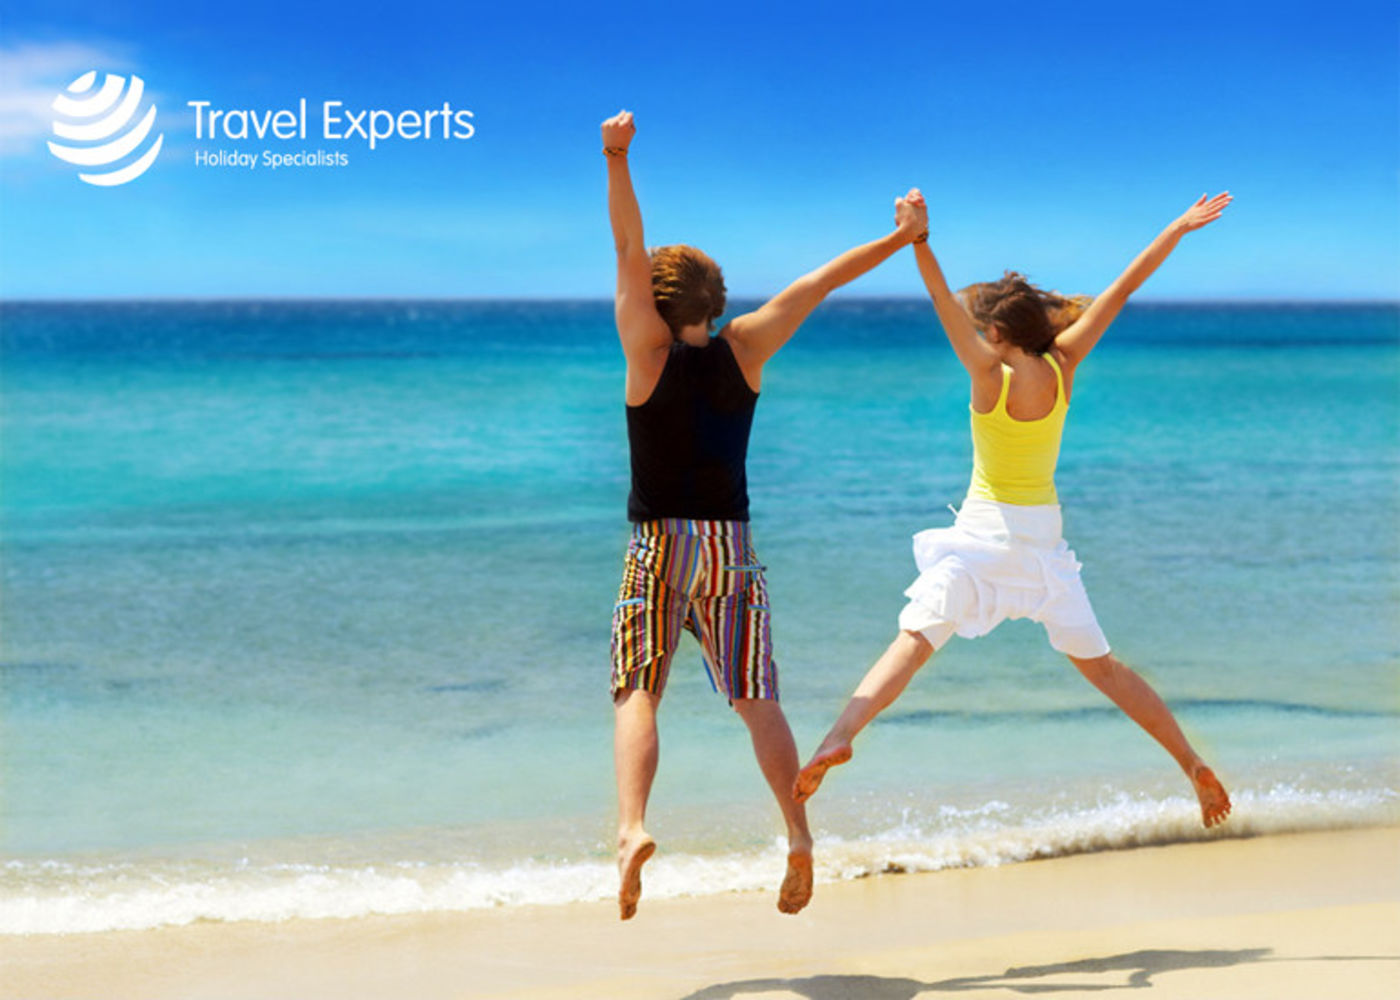 Travel Experts Welcome